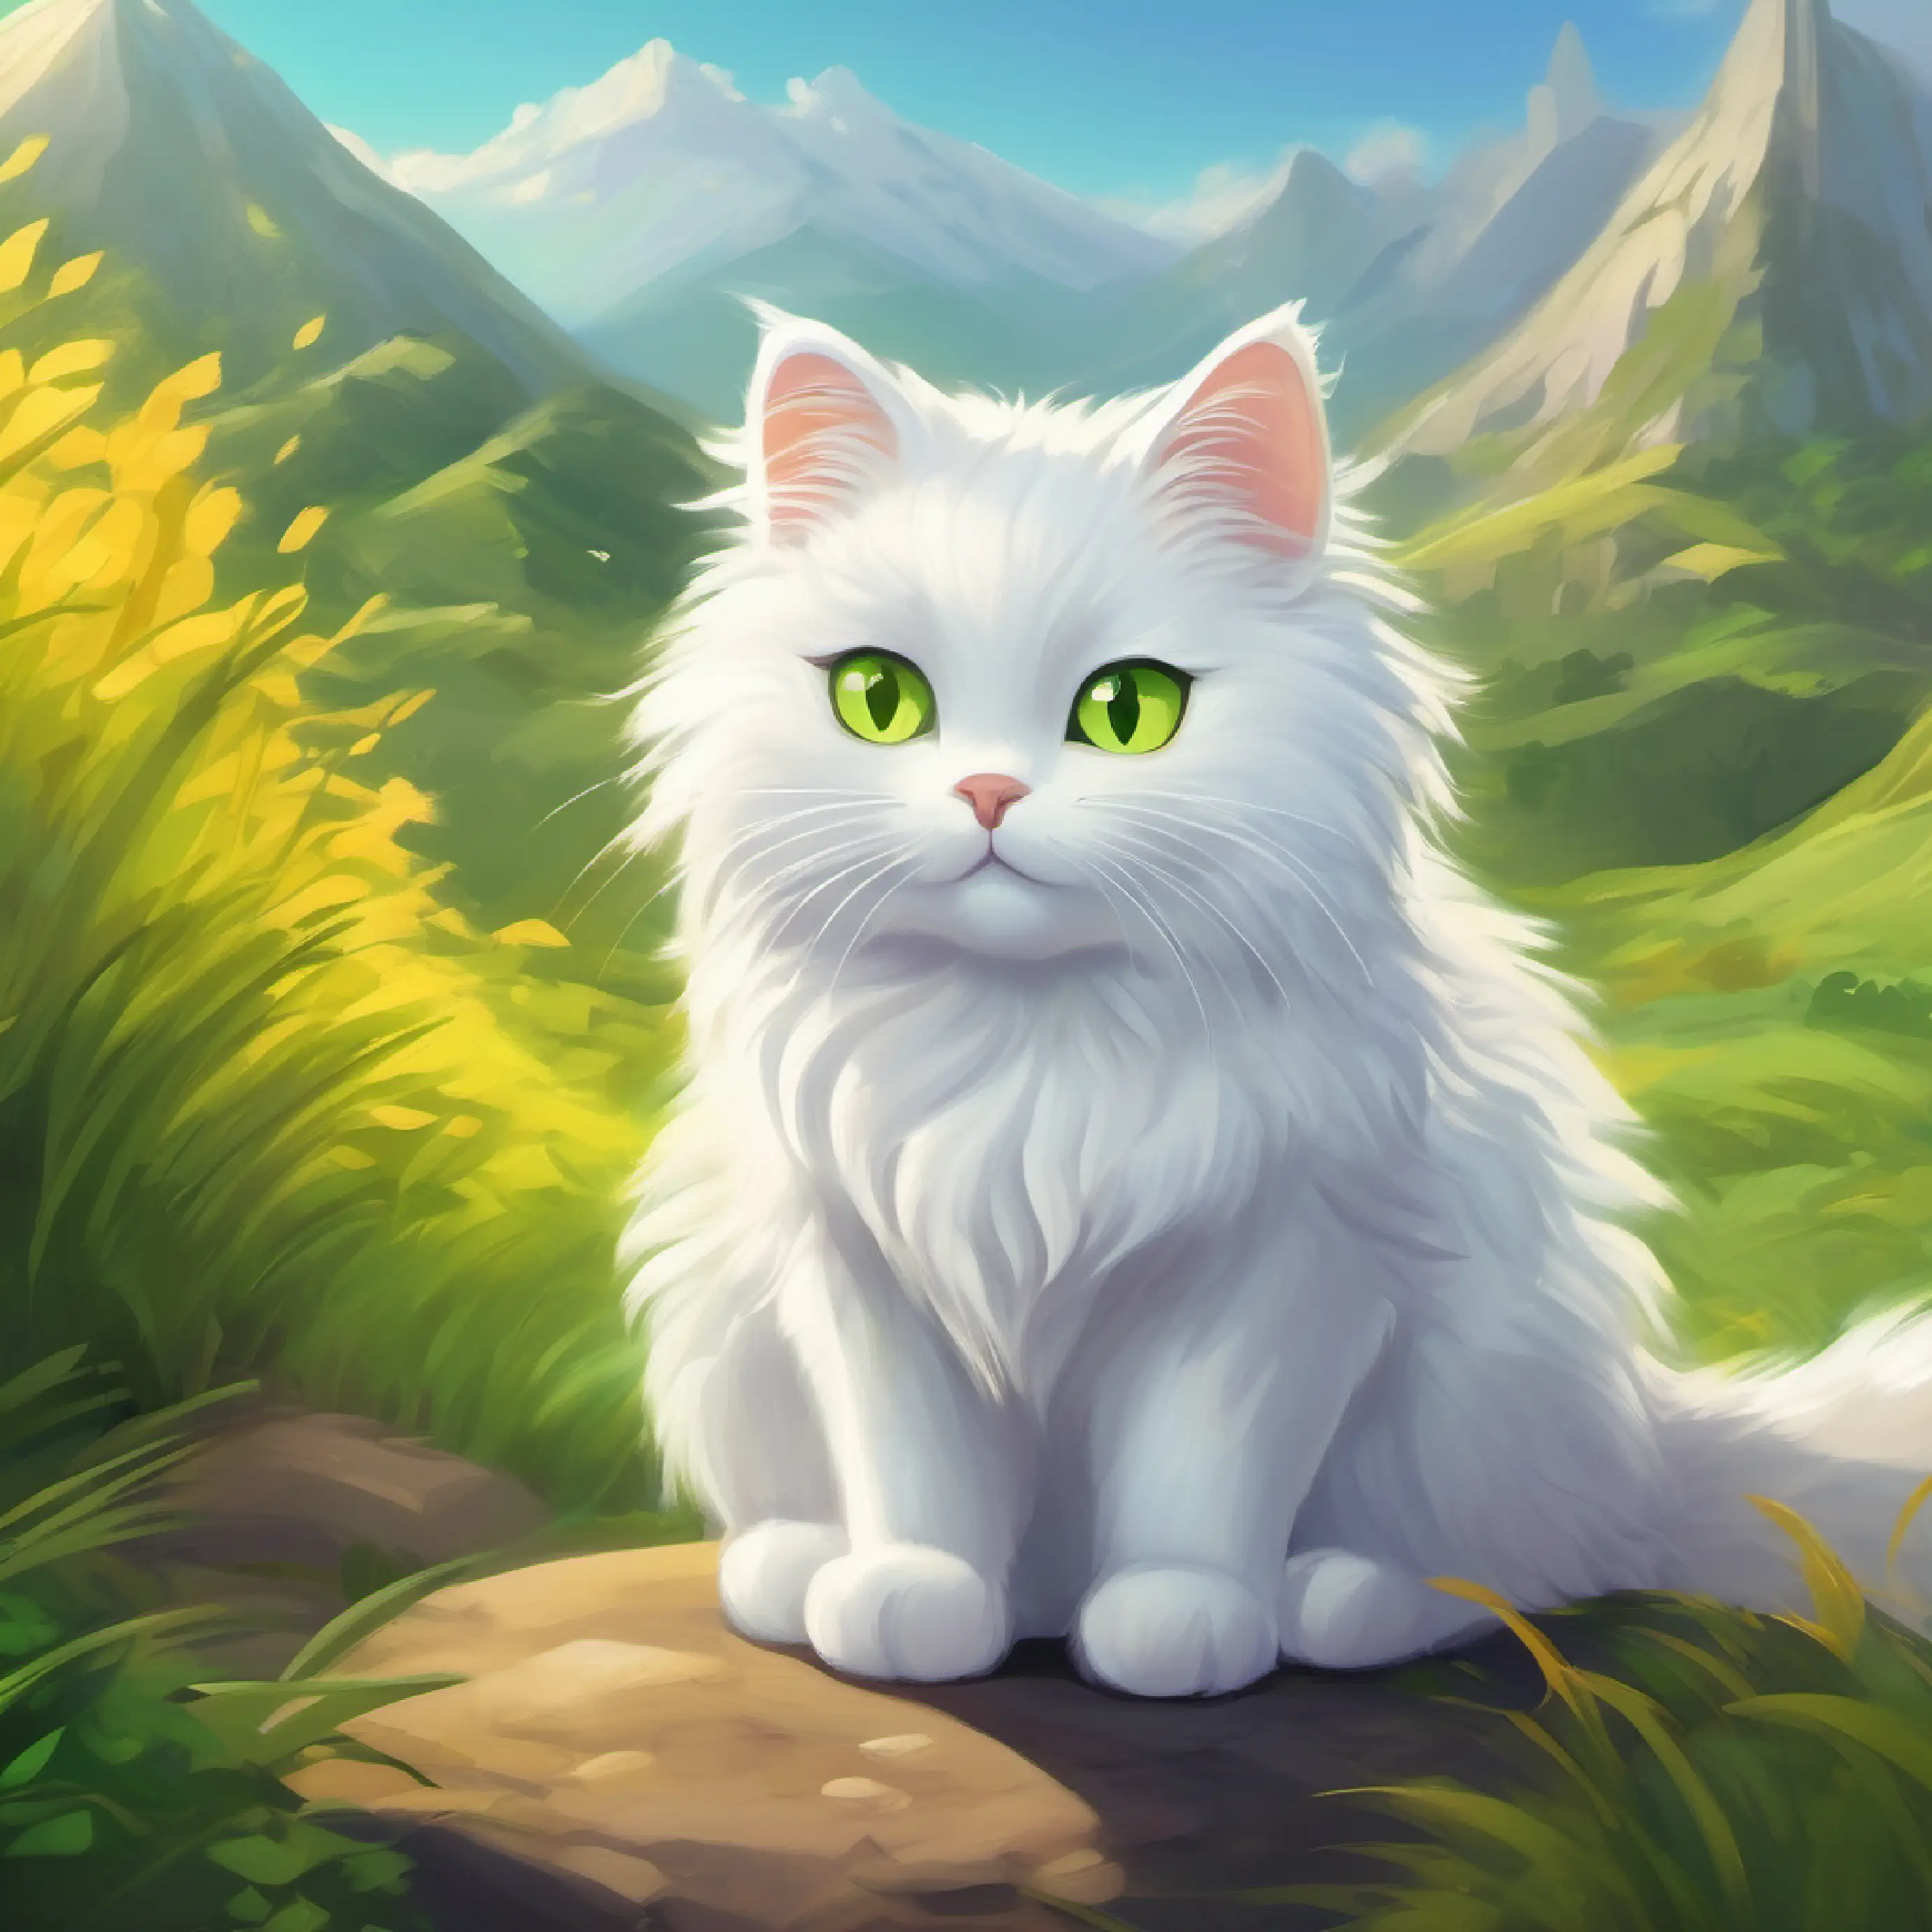 Introduction to Fluffy white cat with yellow-green eyes, adventurous and his decision to go on an adventure.